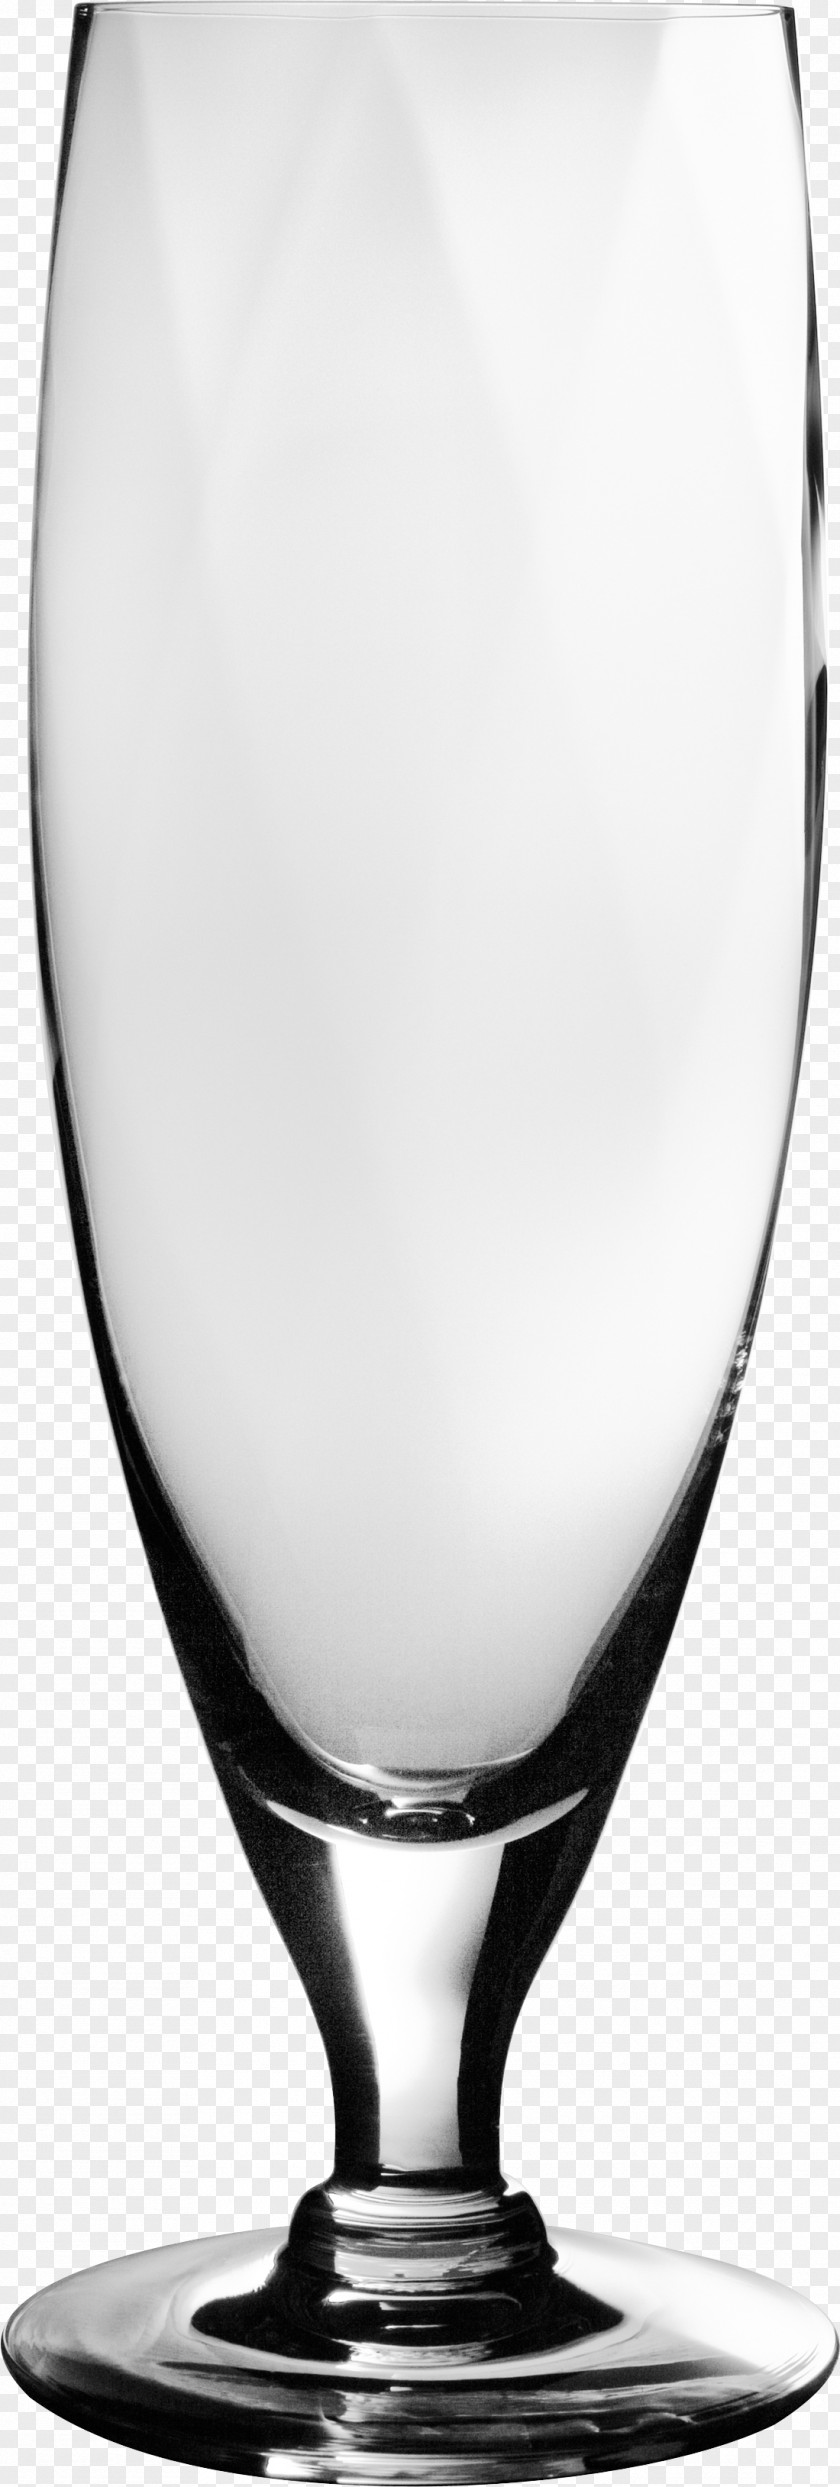 Empty Wine Glass Image PNG